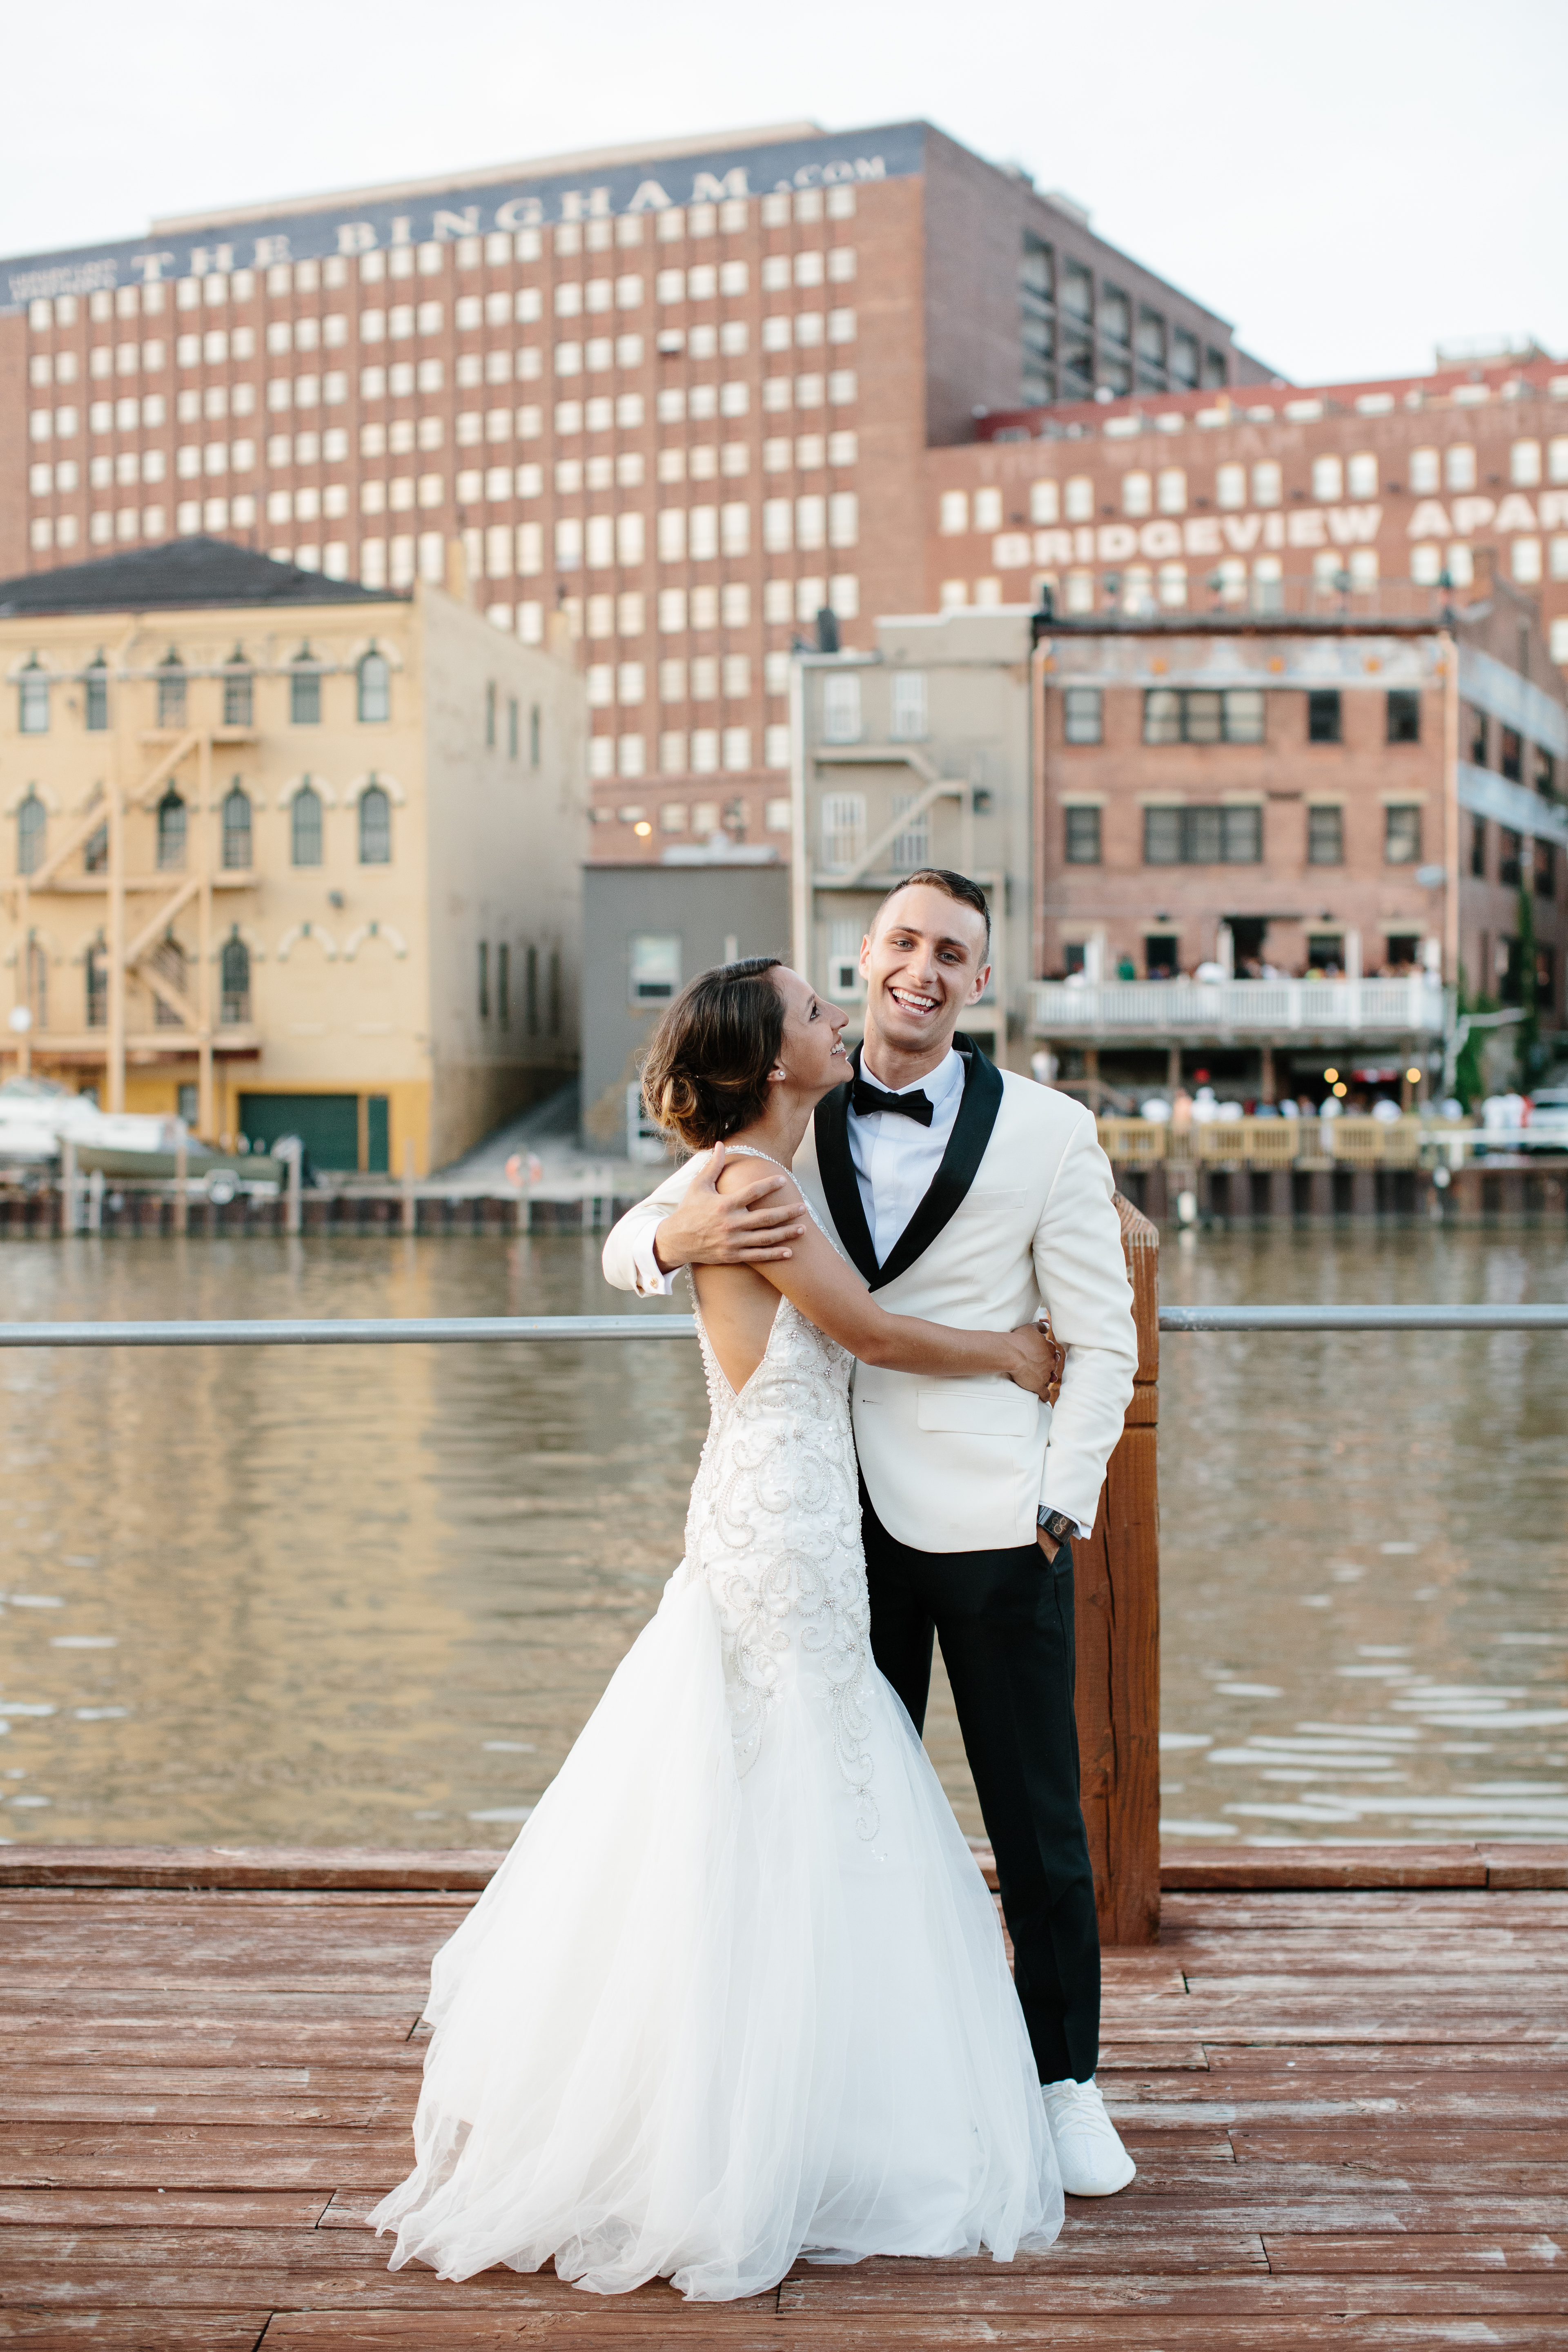 Couple laugh by lake erie during wedding